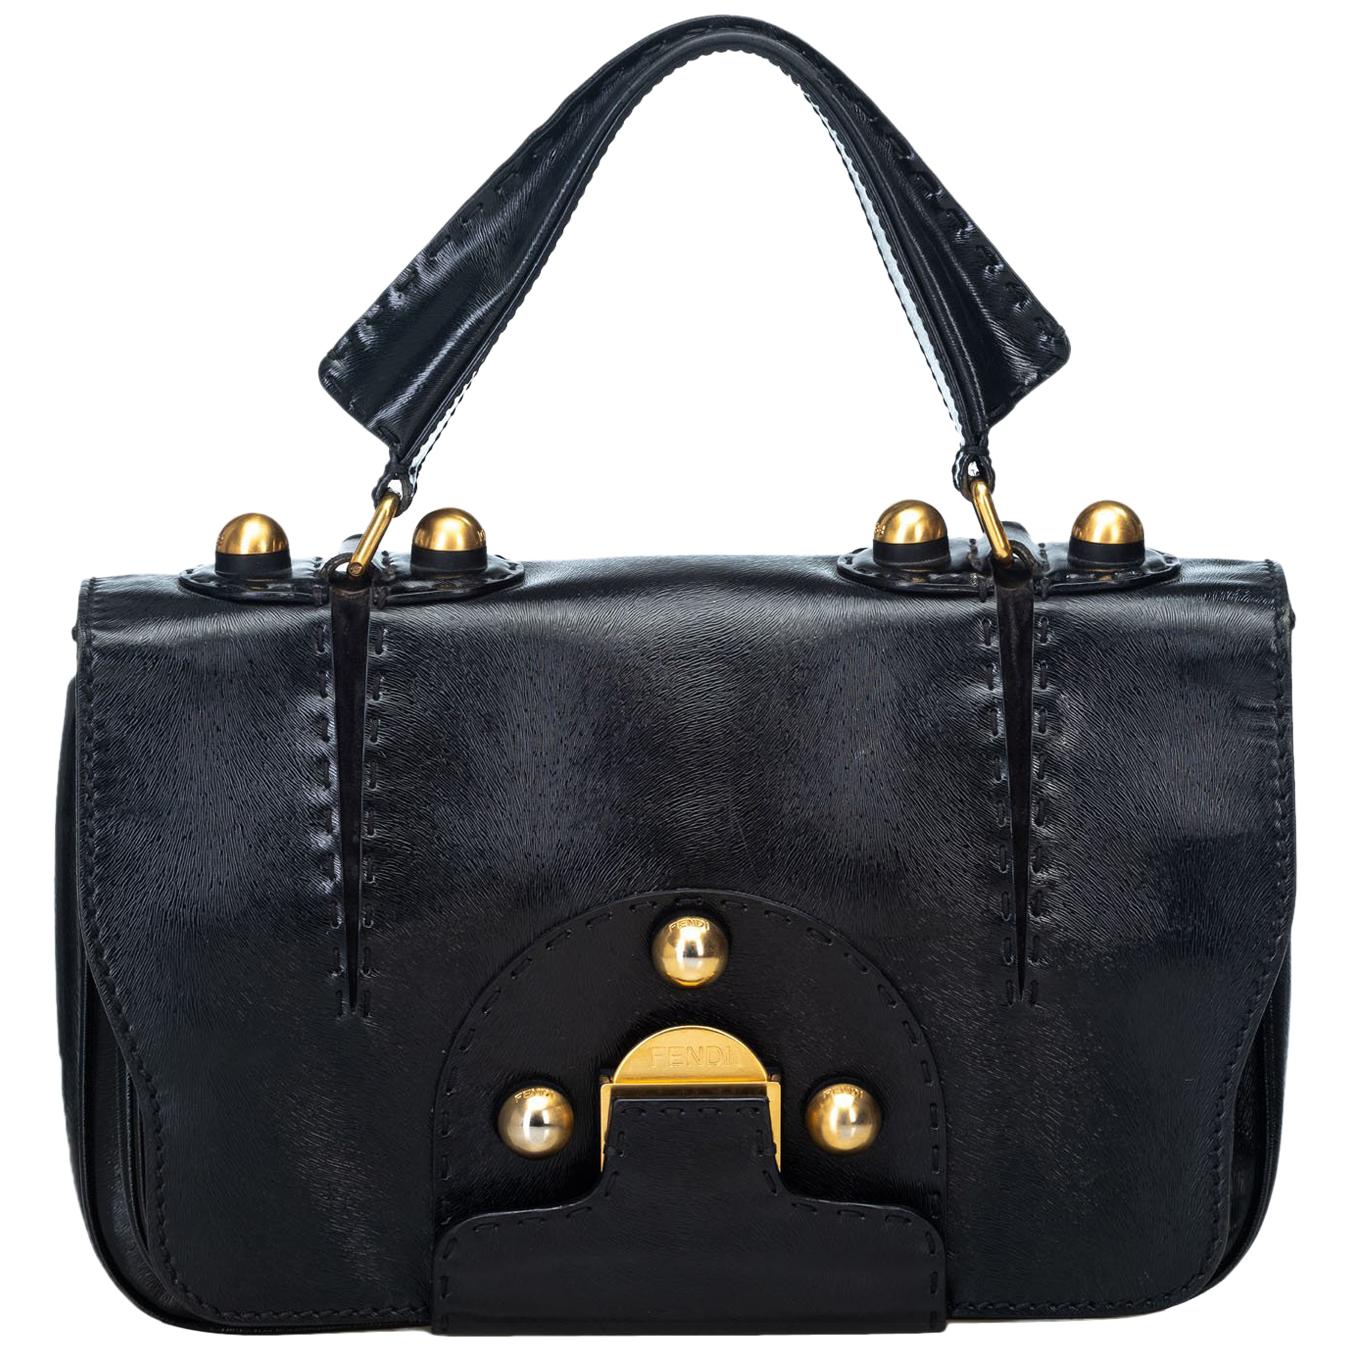 Fendi Black  Leather Satchel Italy w/ This item does not come with inclusions.